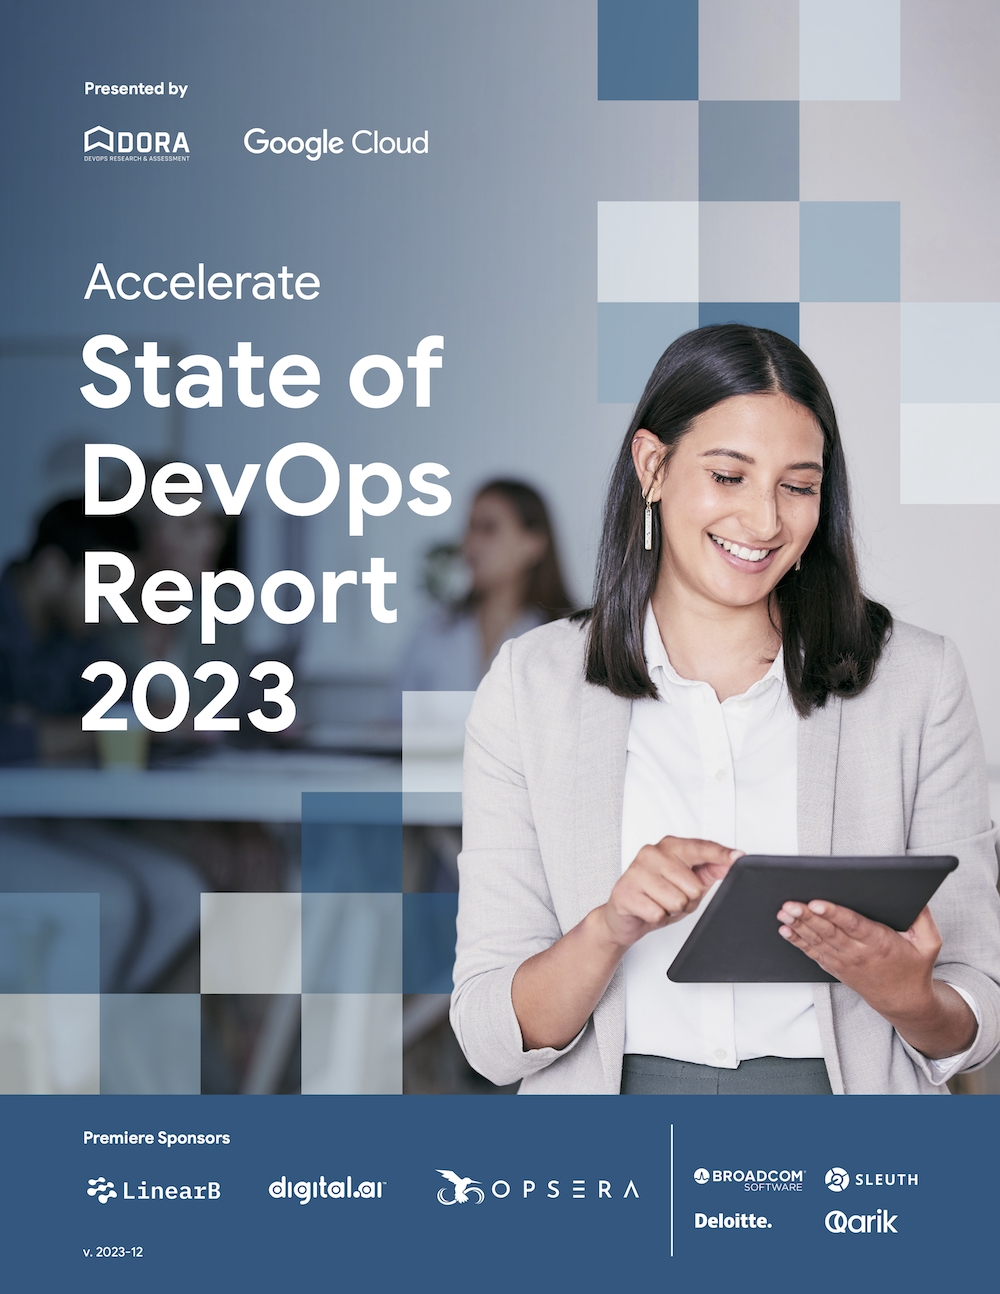 The Accelerate State of DevOps Report 2023